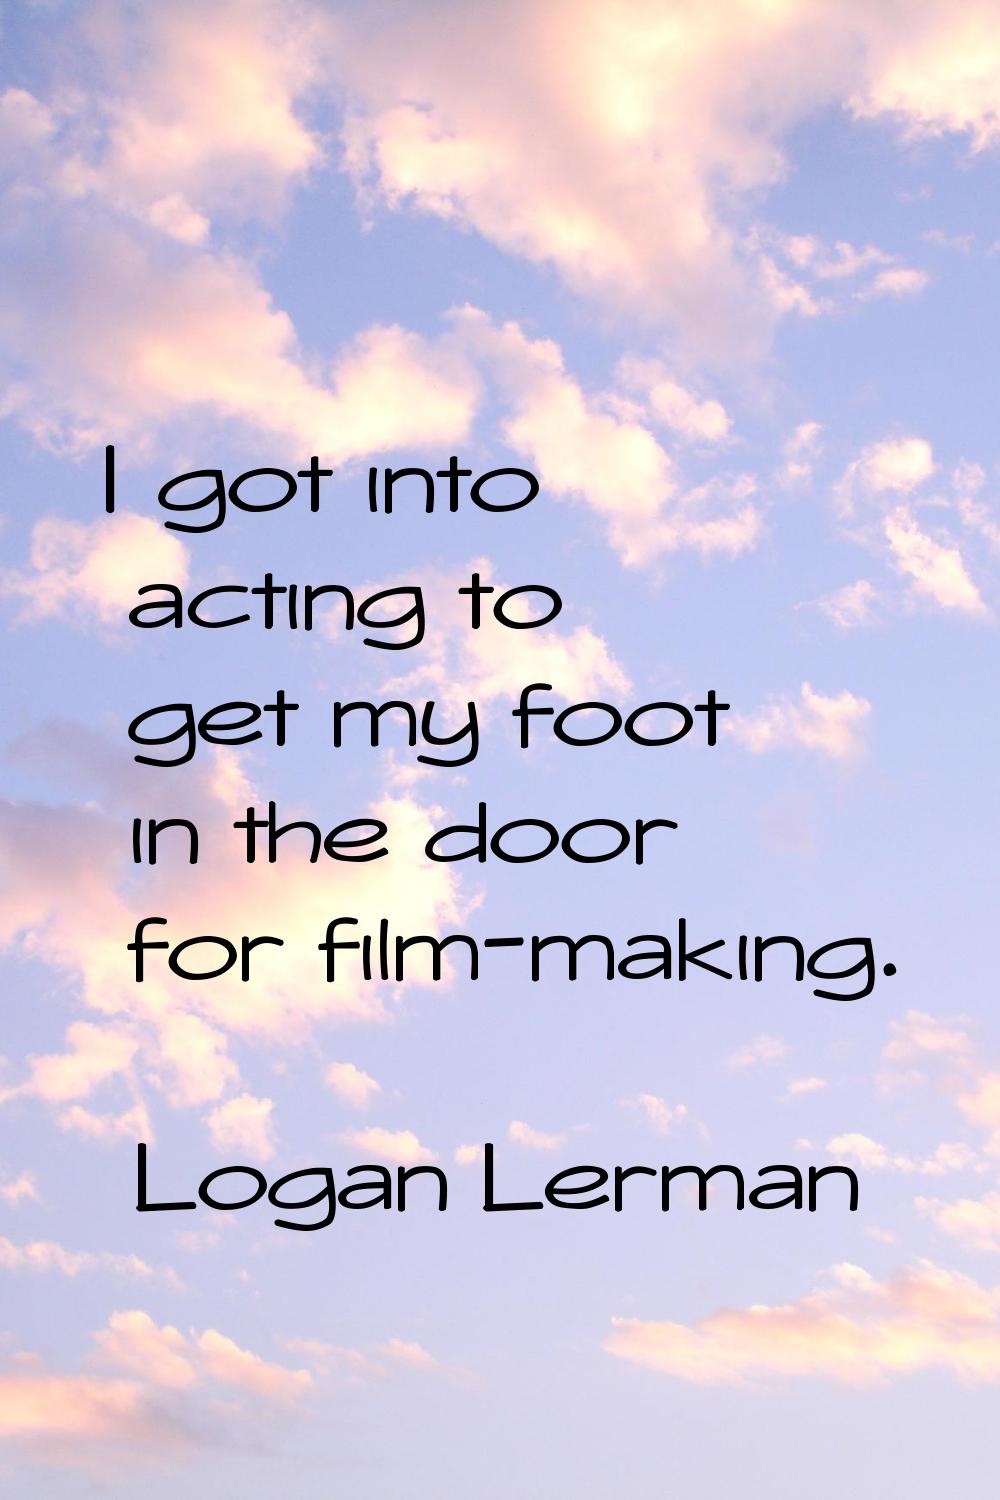 I got into acting to get my foot in the door for film-making.